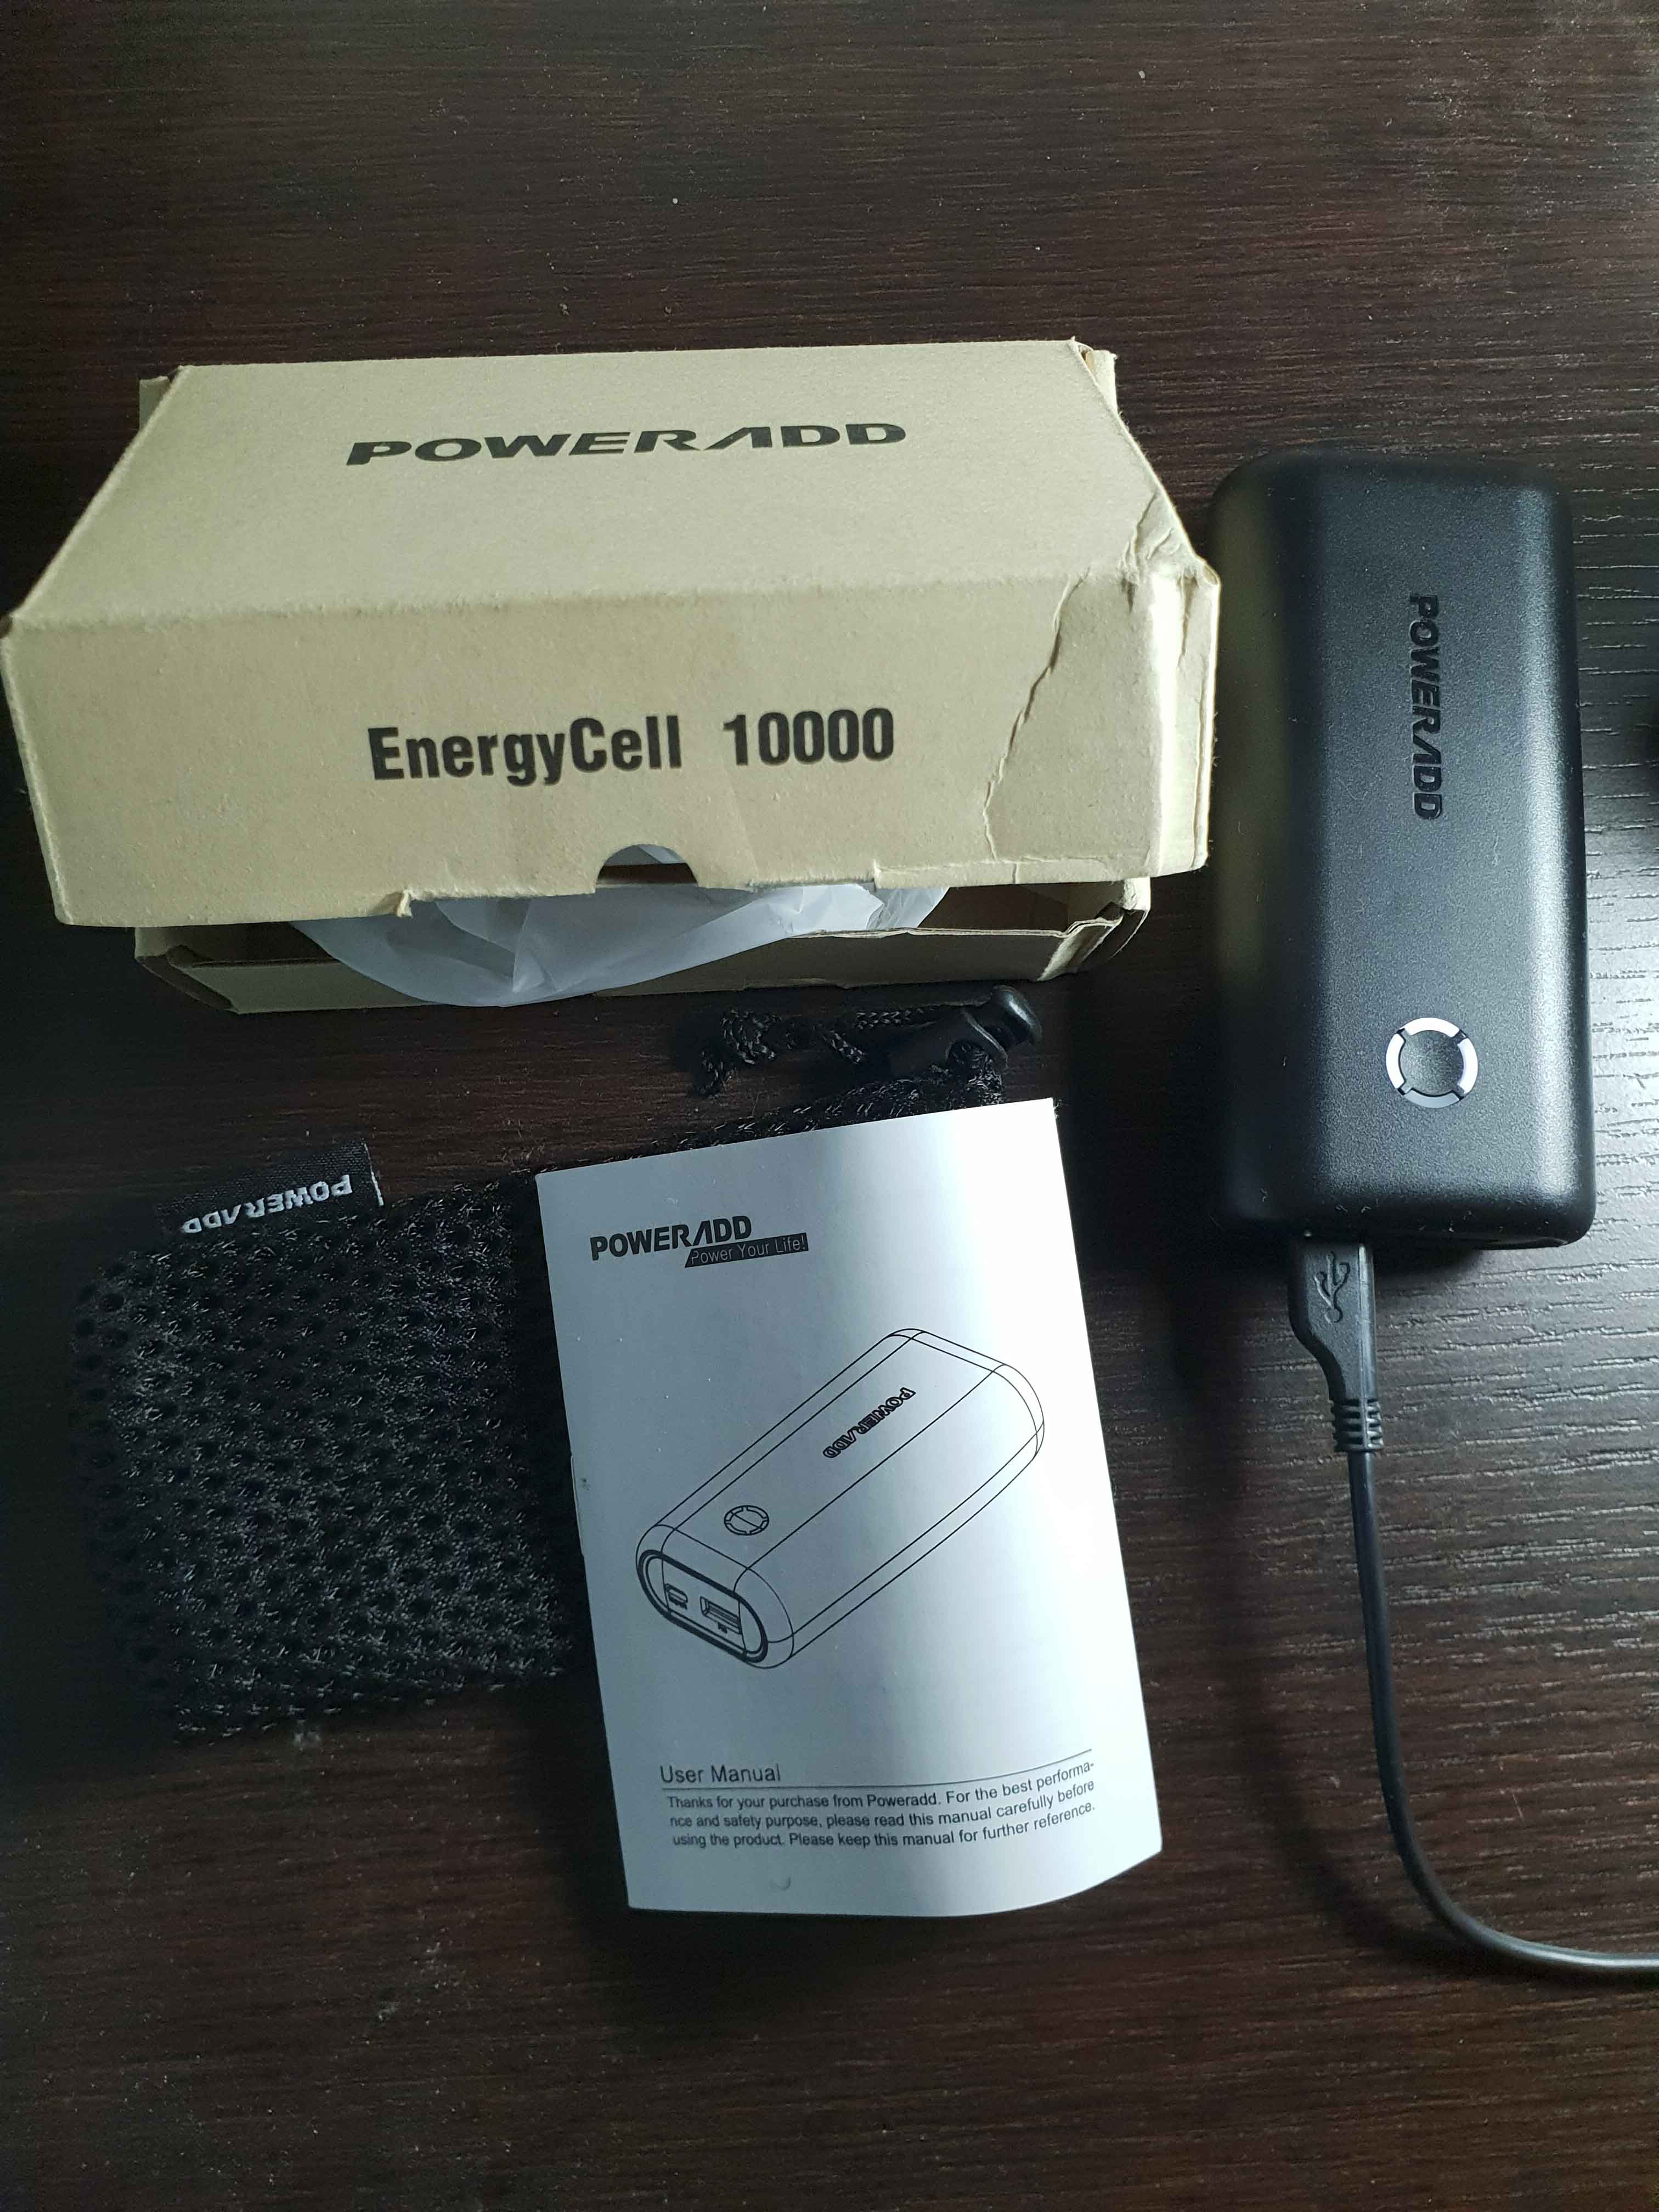 Poweradd EnergyCell 10000, Portable Charger Power Bank